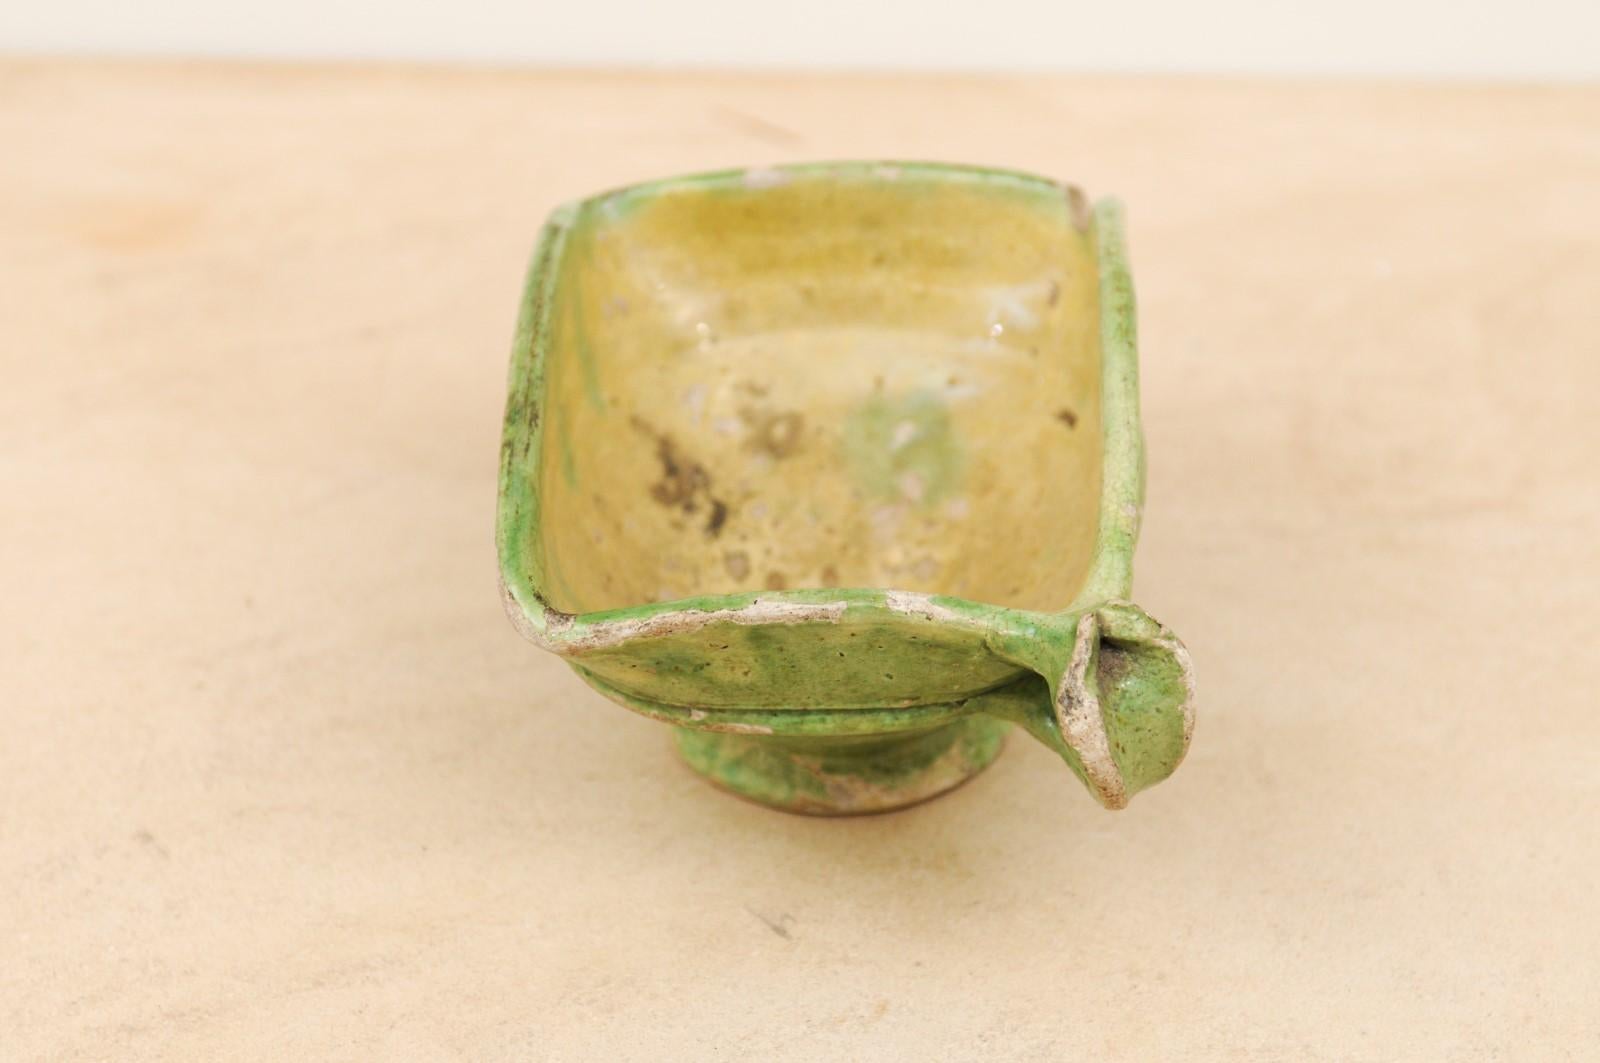 Rustic French 19th Century Green Glazed Square-Shaped Bowl with Weathered Patina For Sale 2